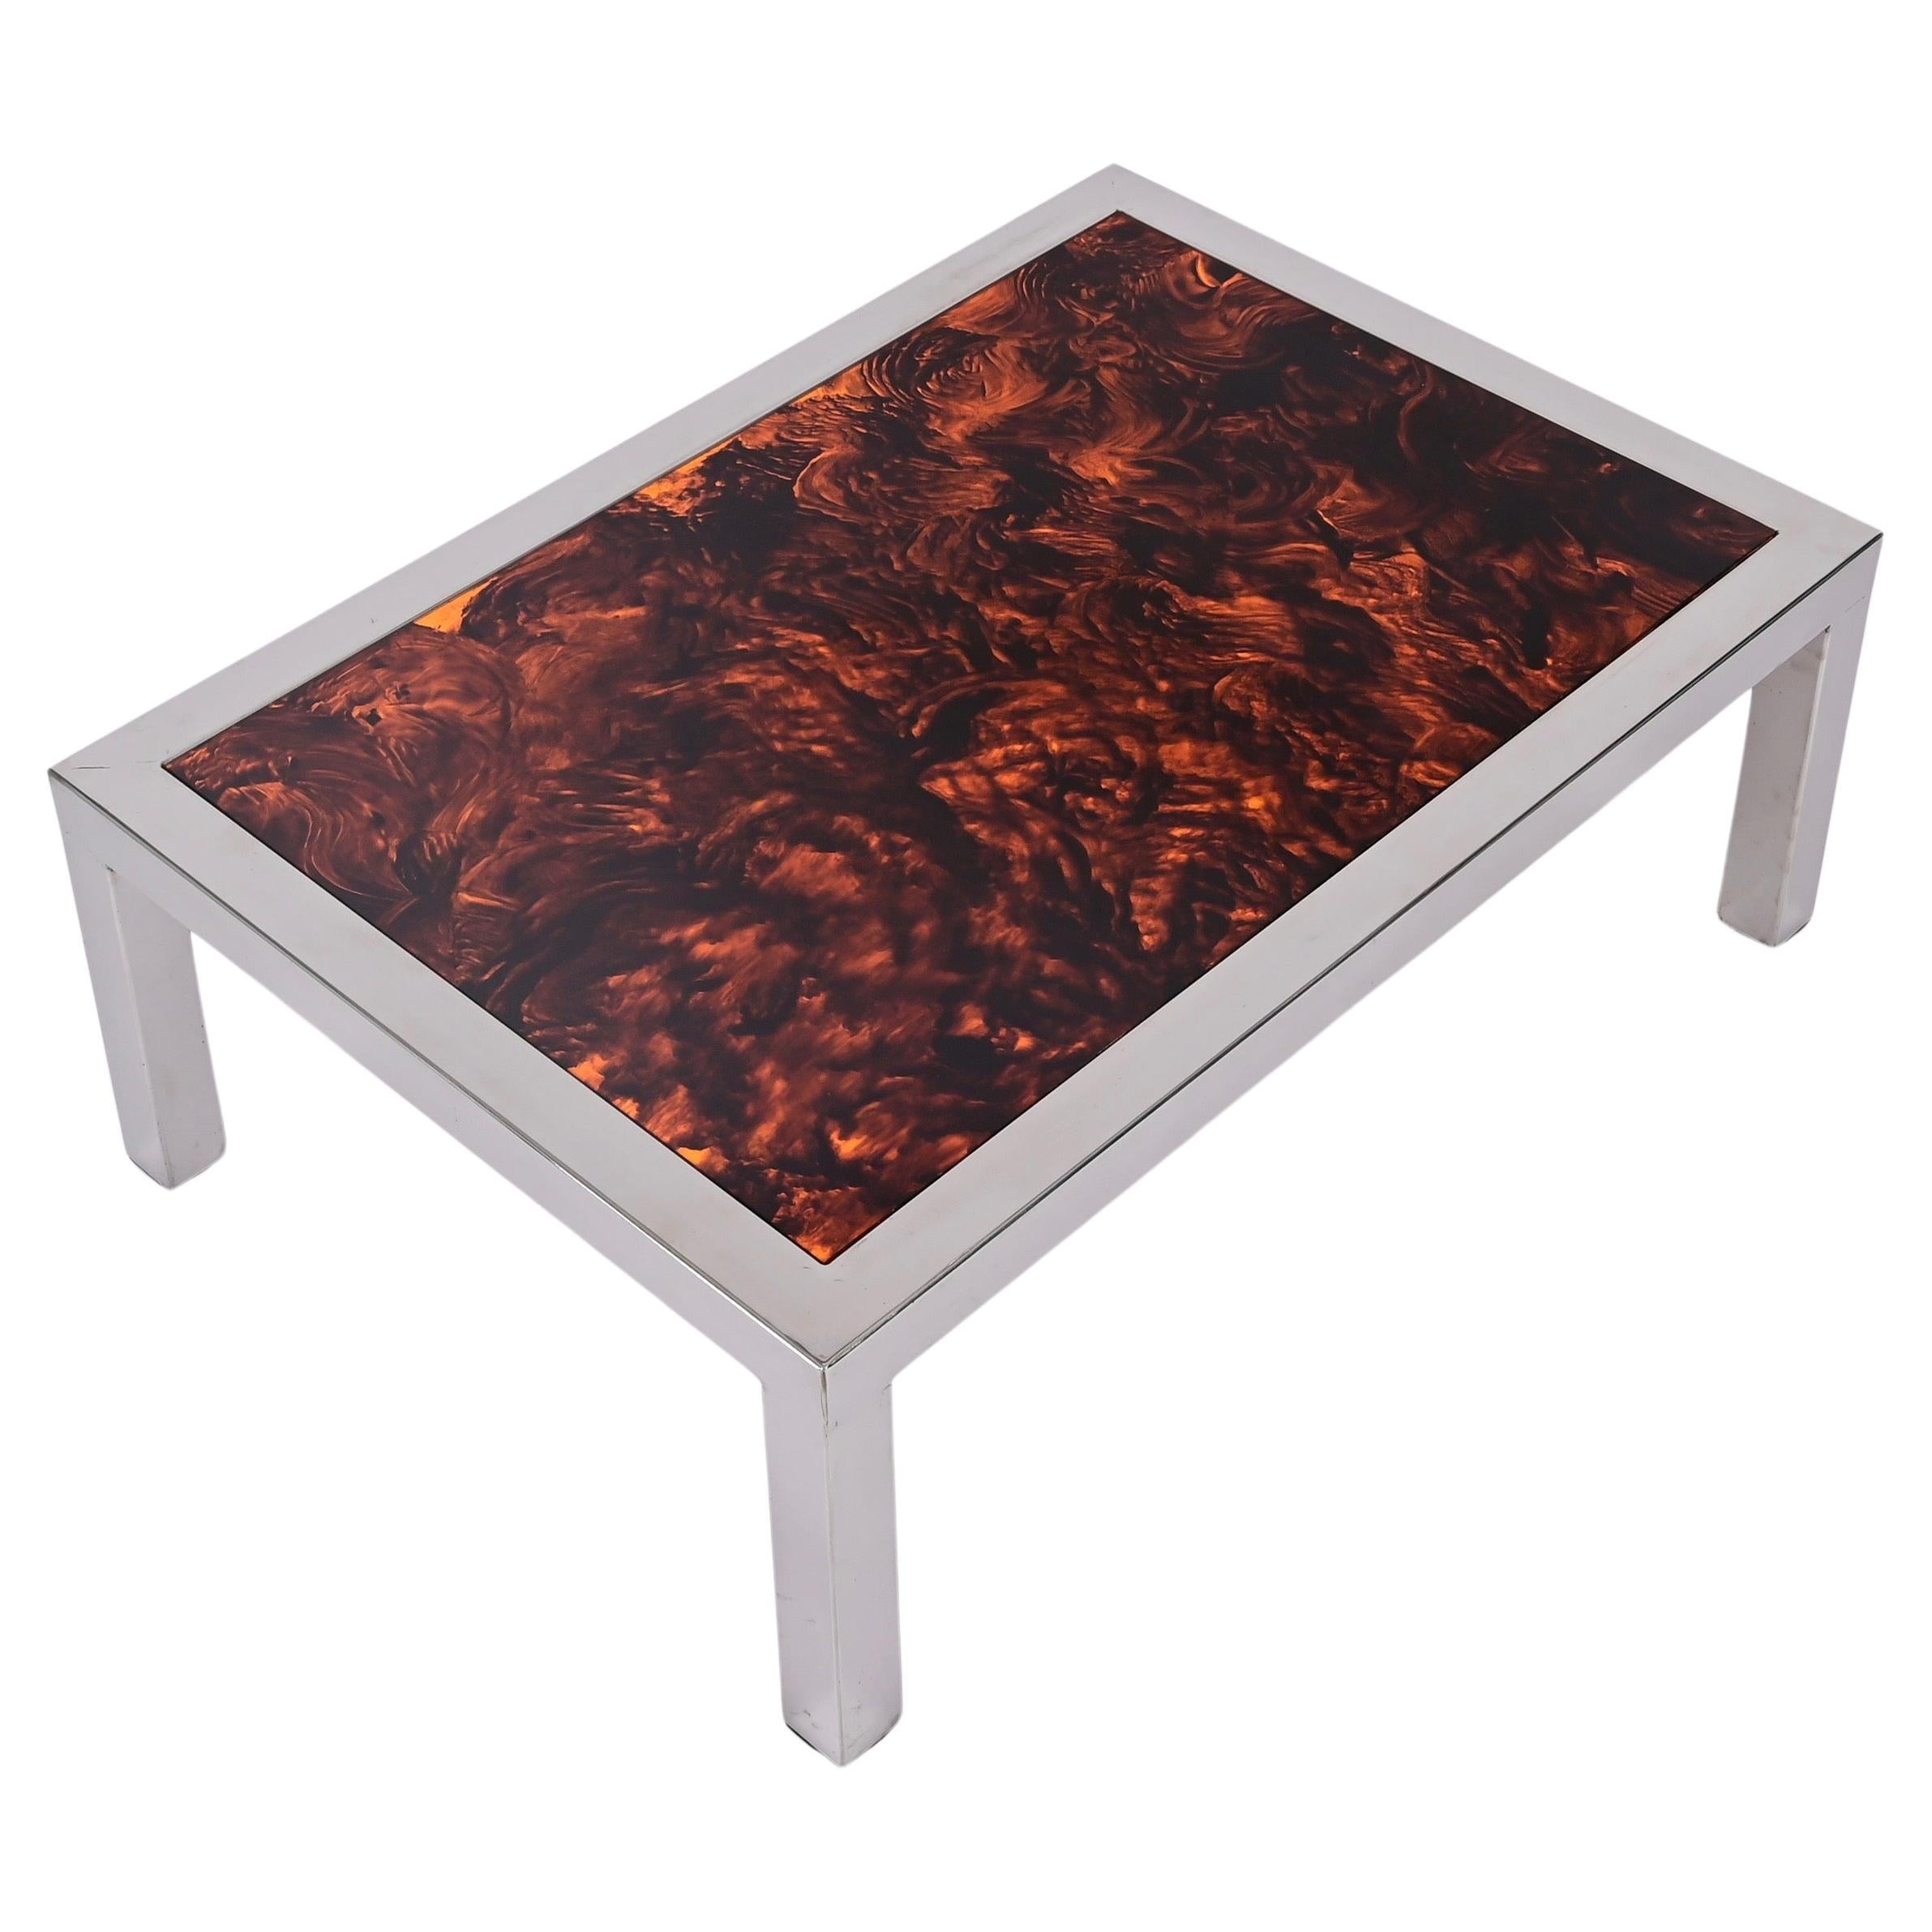 Chromed Steel and Tortoiseshell Effect Lucite Coffee Table, Italy 1970s For Sale